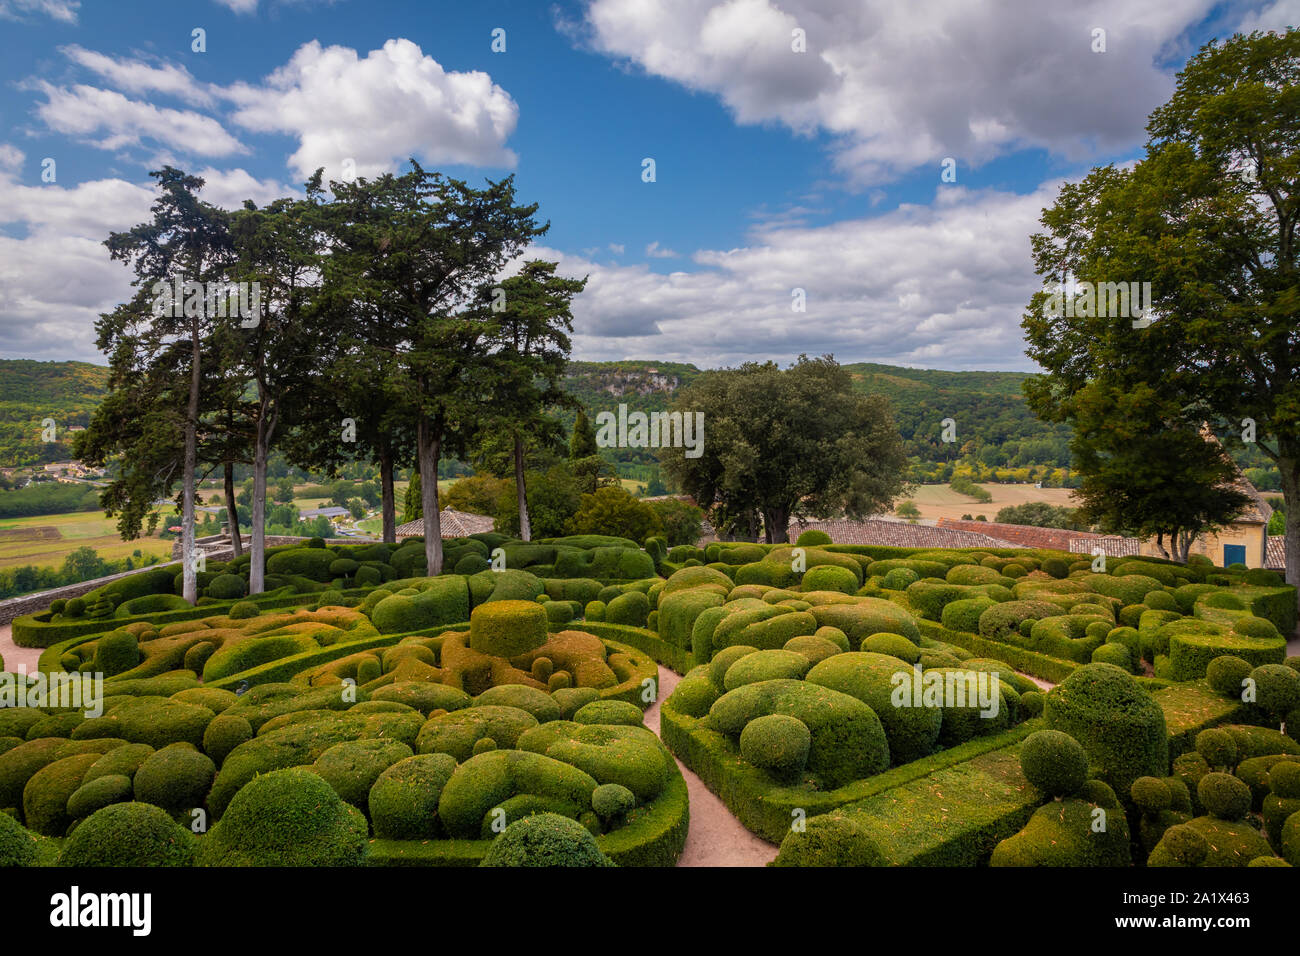 The Gardens of Marqueyssac are located in the town of Vézac, in the French area of Dordogne, in the region of Nouvelle-Aquitaine. It is on the list of Stock Photo